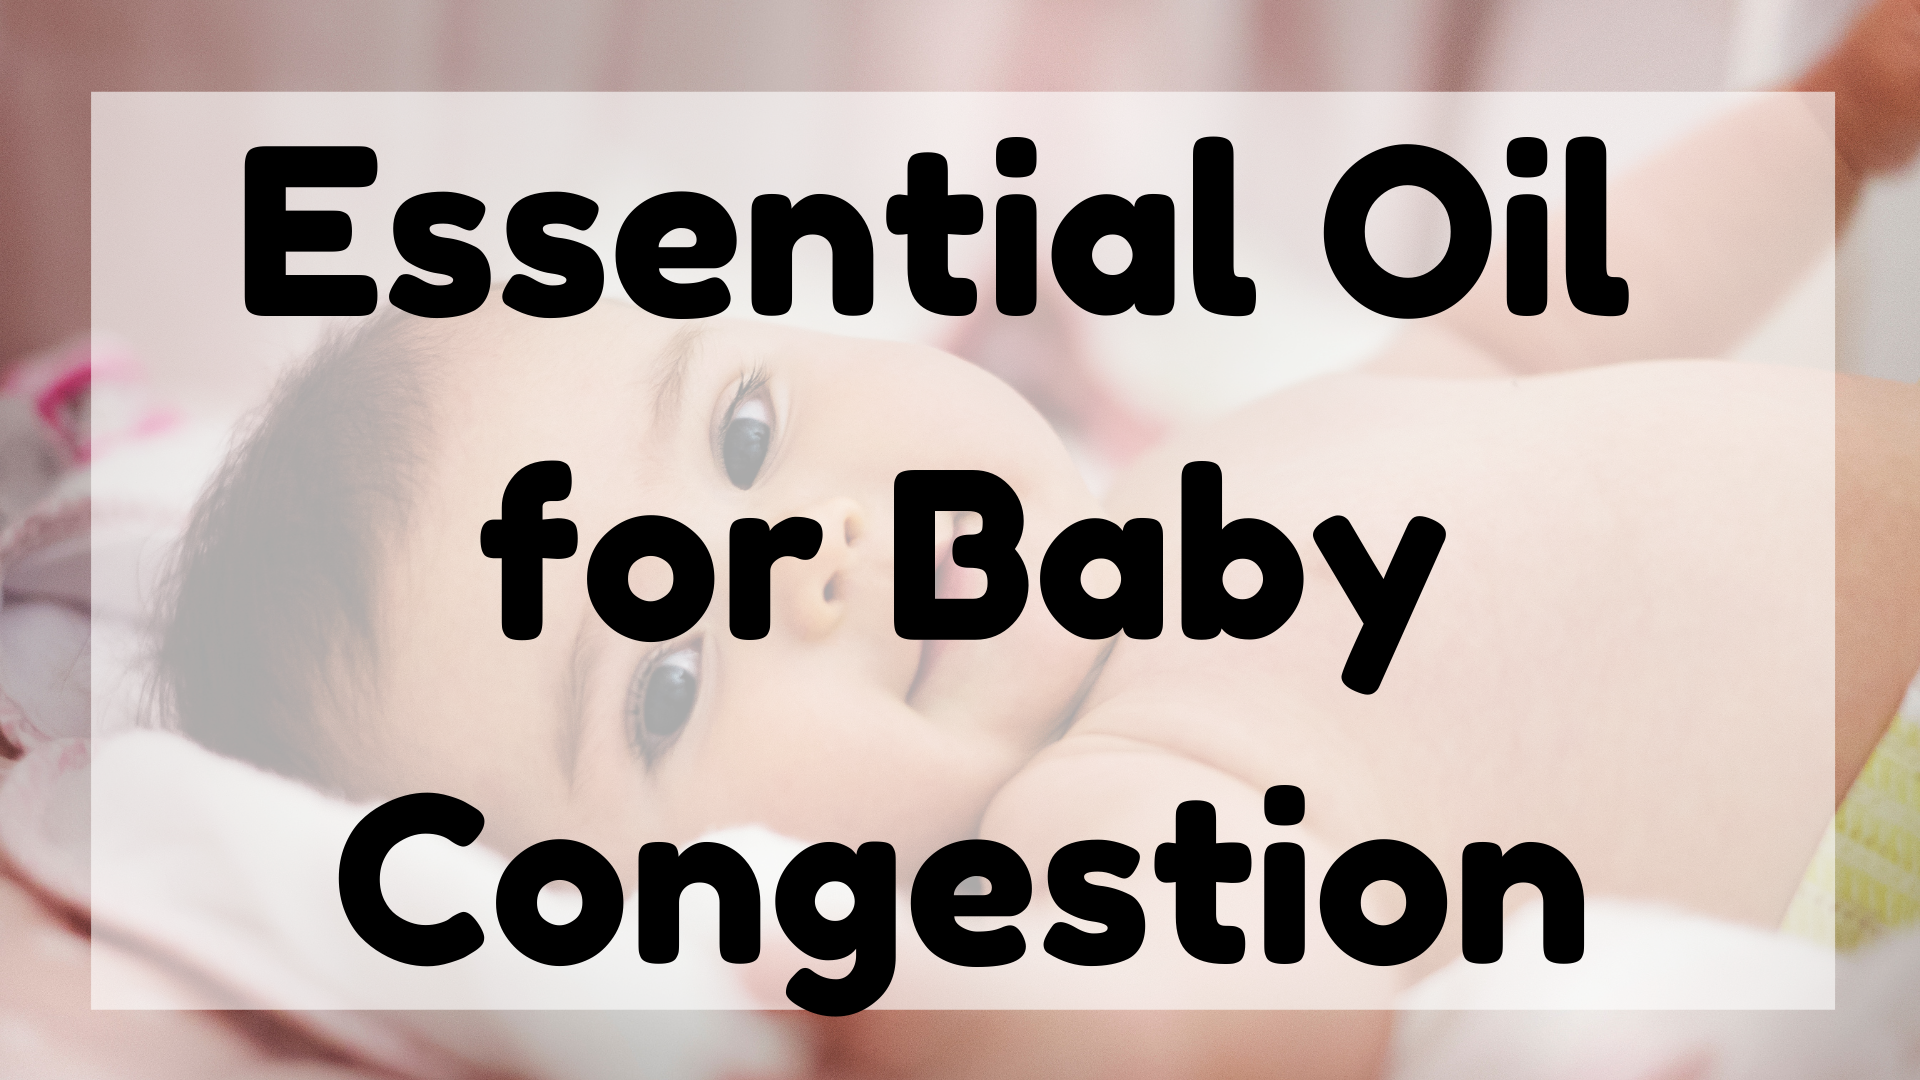 Essential Oil For Baby Congestion